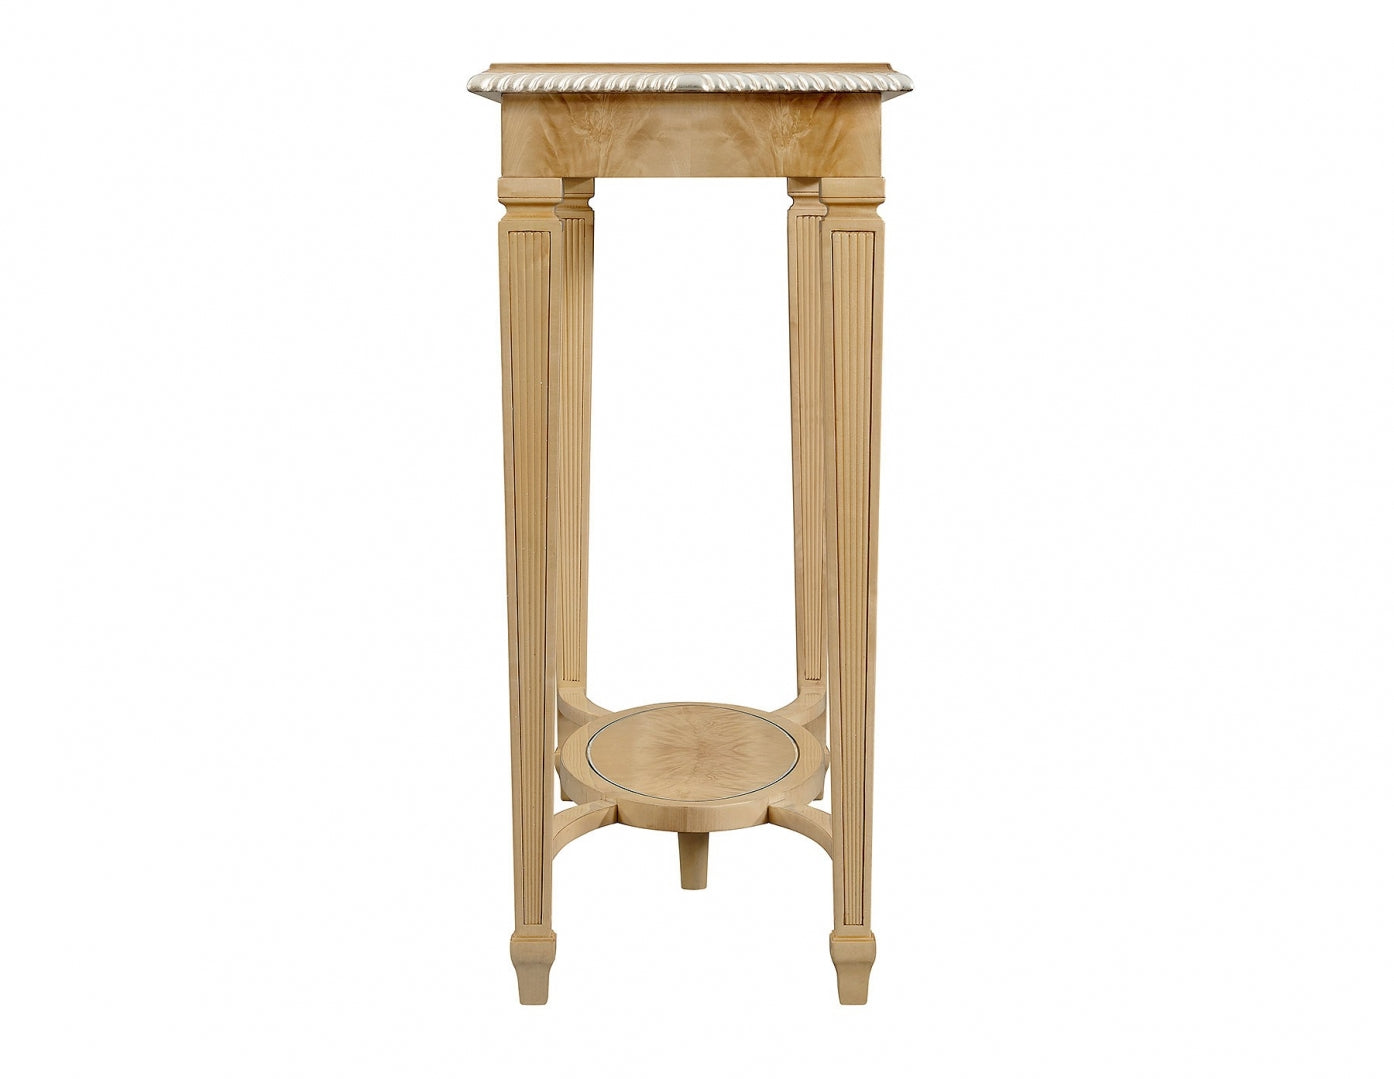 Crotch sycamore console table with glass top